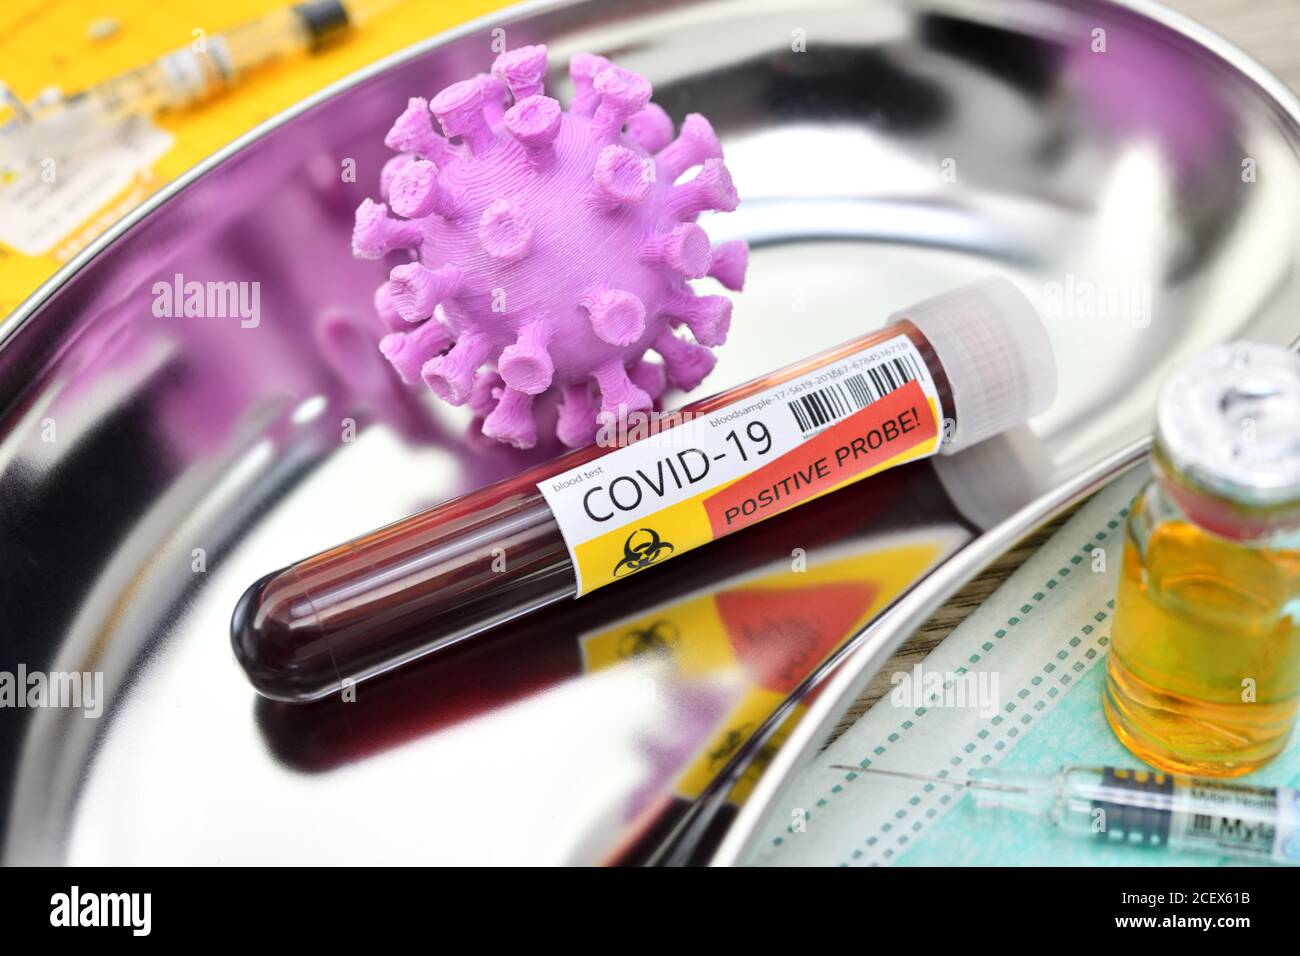 COVID-19 blood collection tube and coronavirus model in a kidney dish, corona vaccination Stock Photo